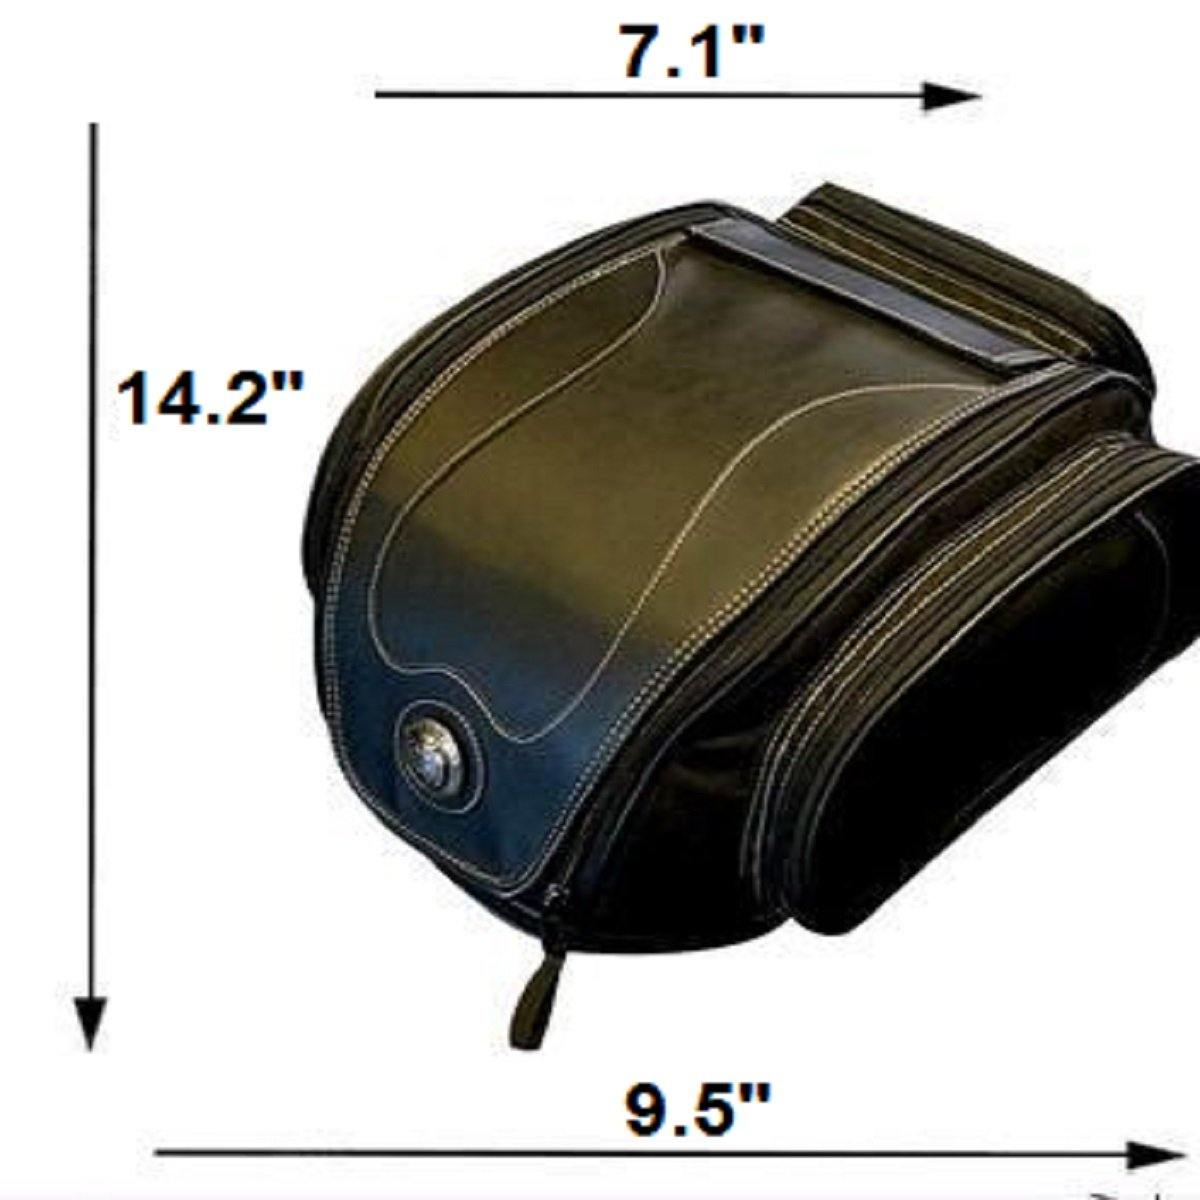 A picture of the Universal Motorcycle Retro Tail Bag with Waterproof Cover, made from waterproof leather and fiber material, featuring measurements.